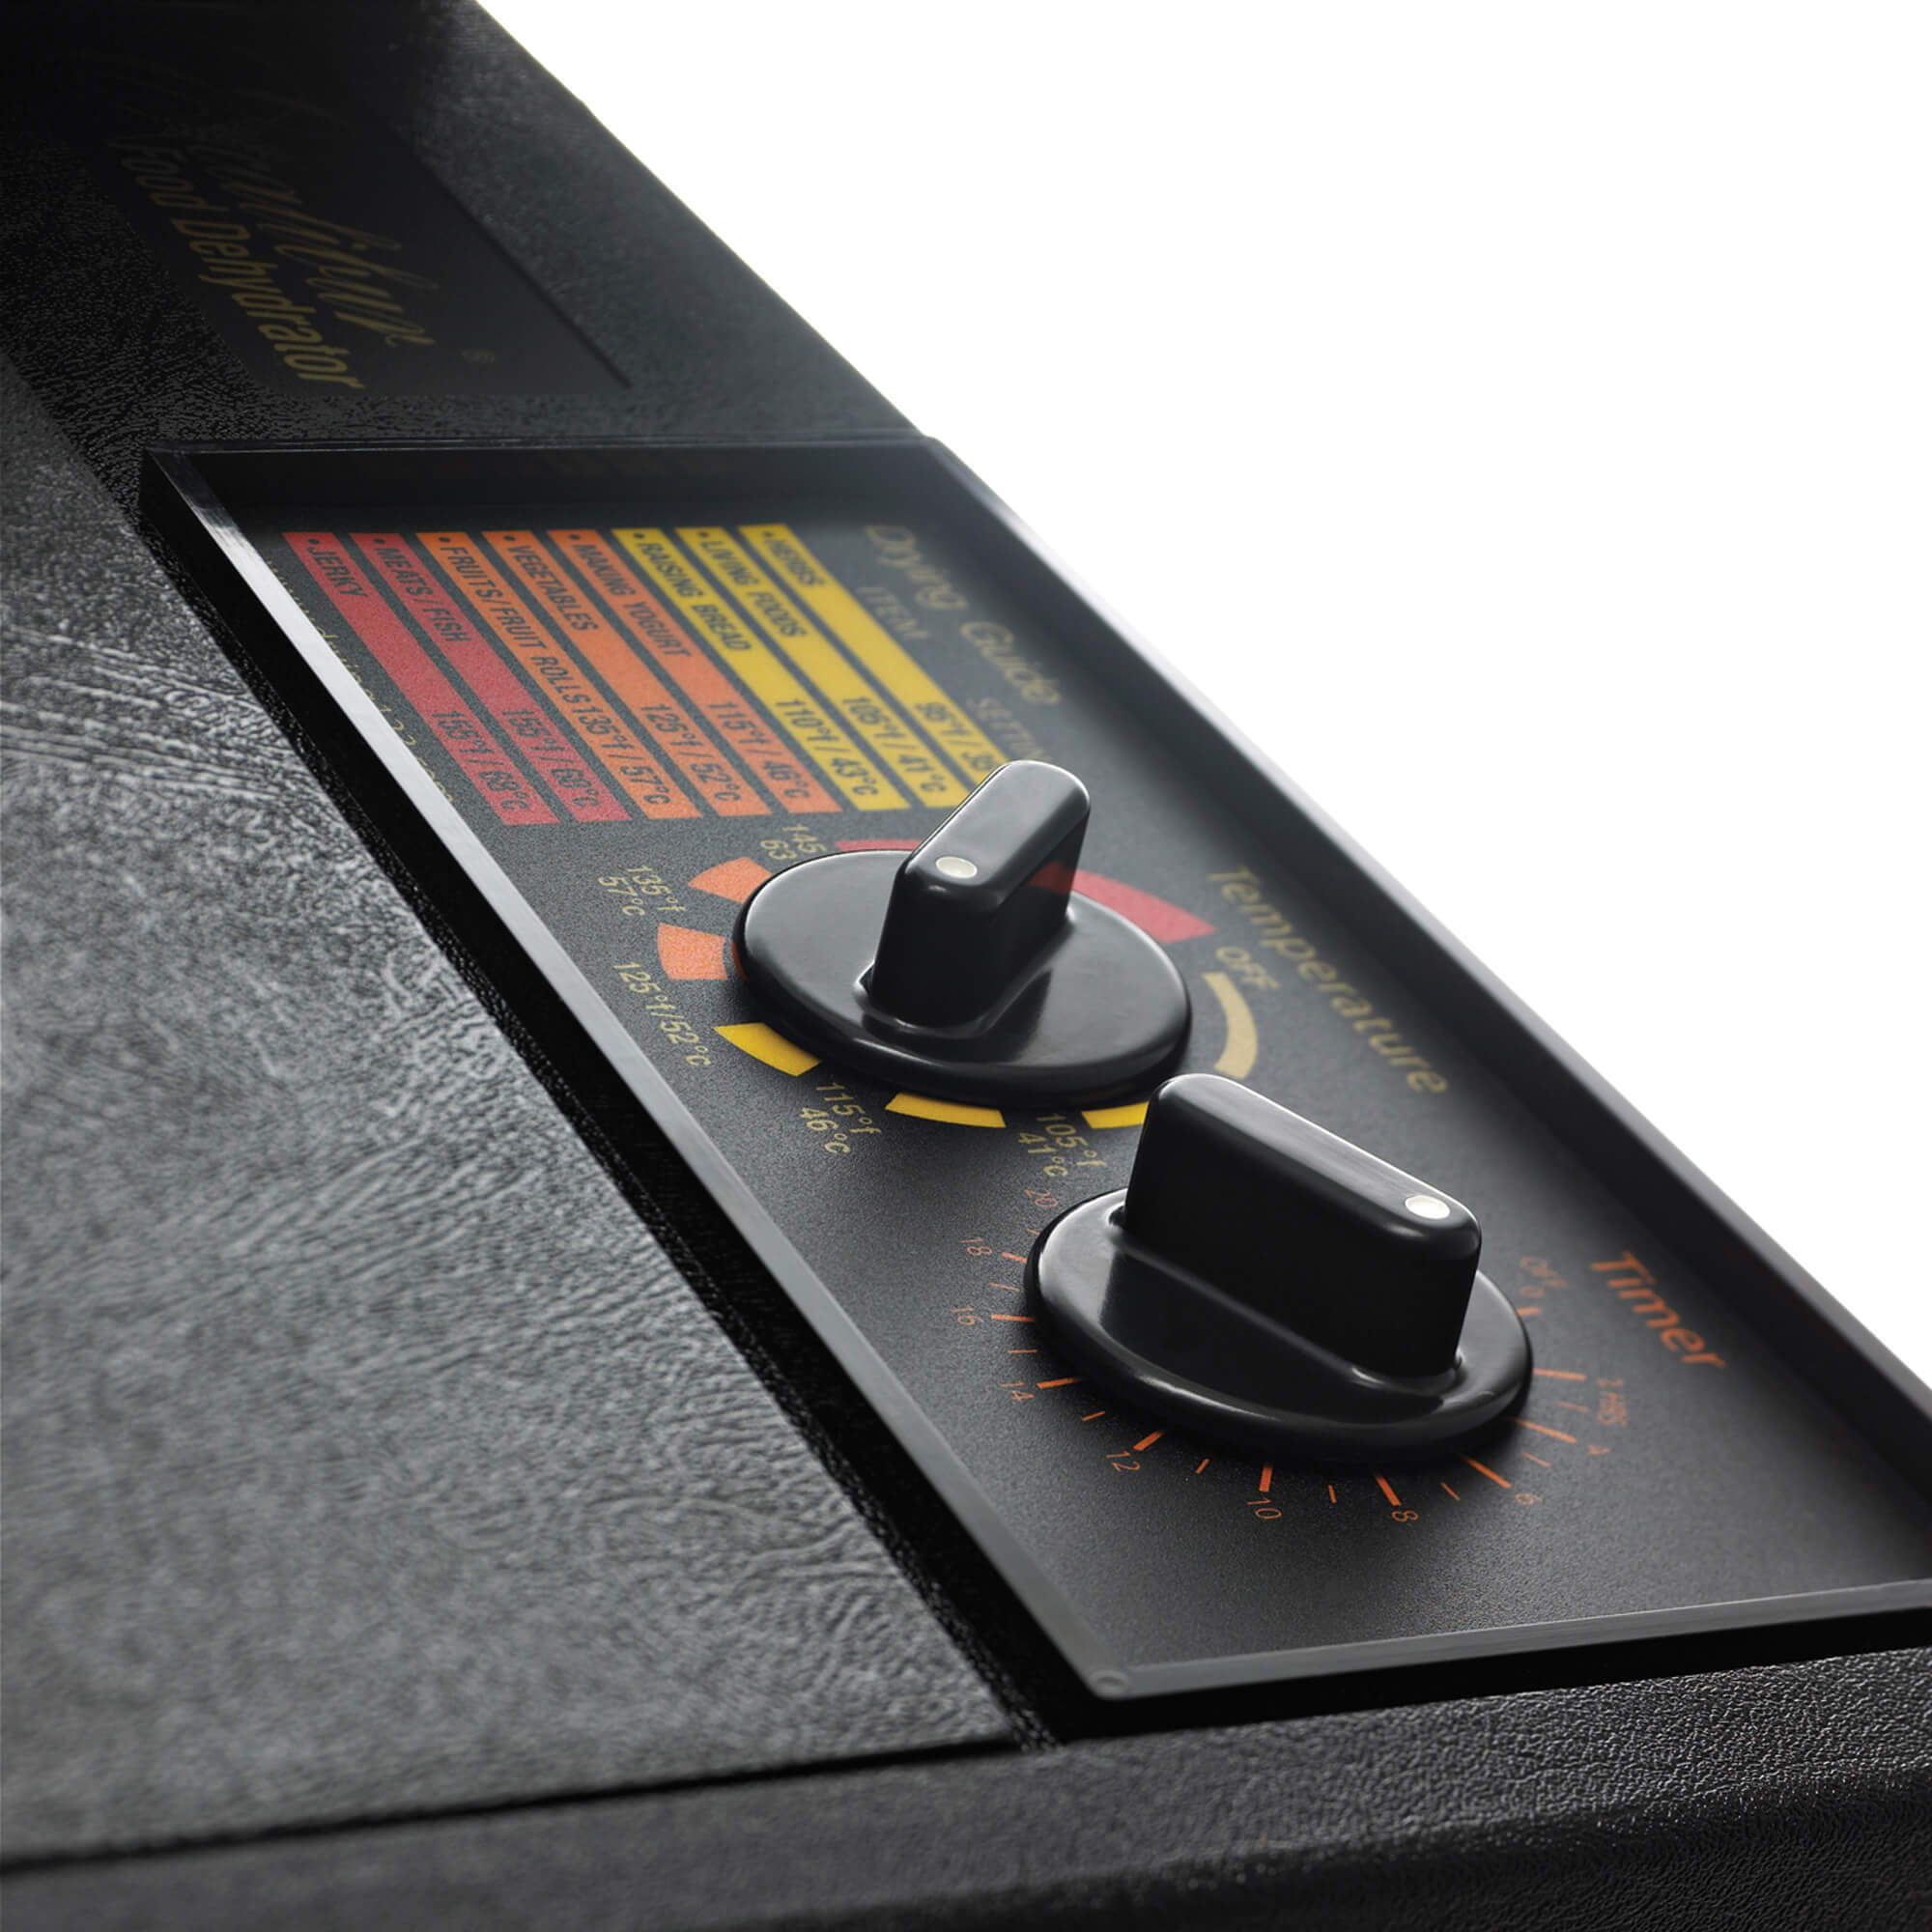 Close up view of the Excalibr 4926T 9 tray dehydrator control knobs.